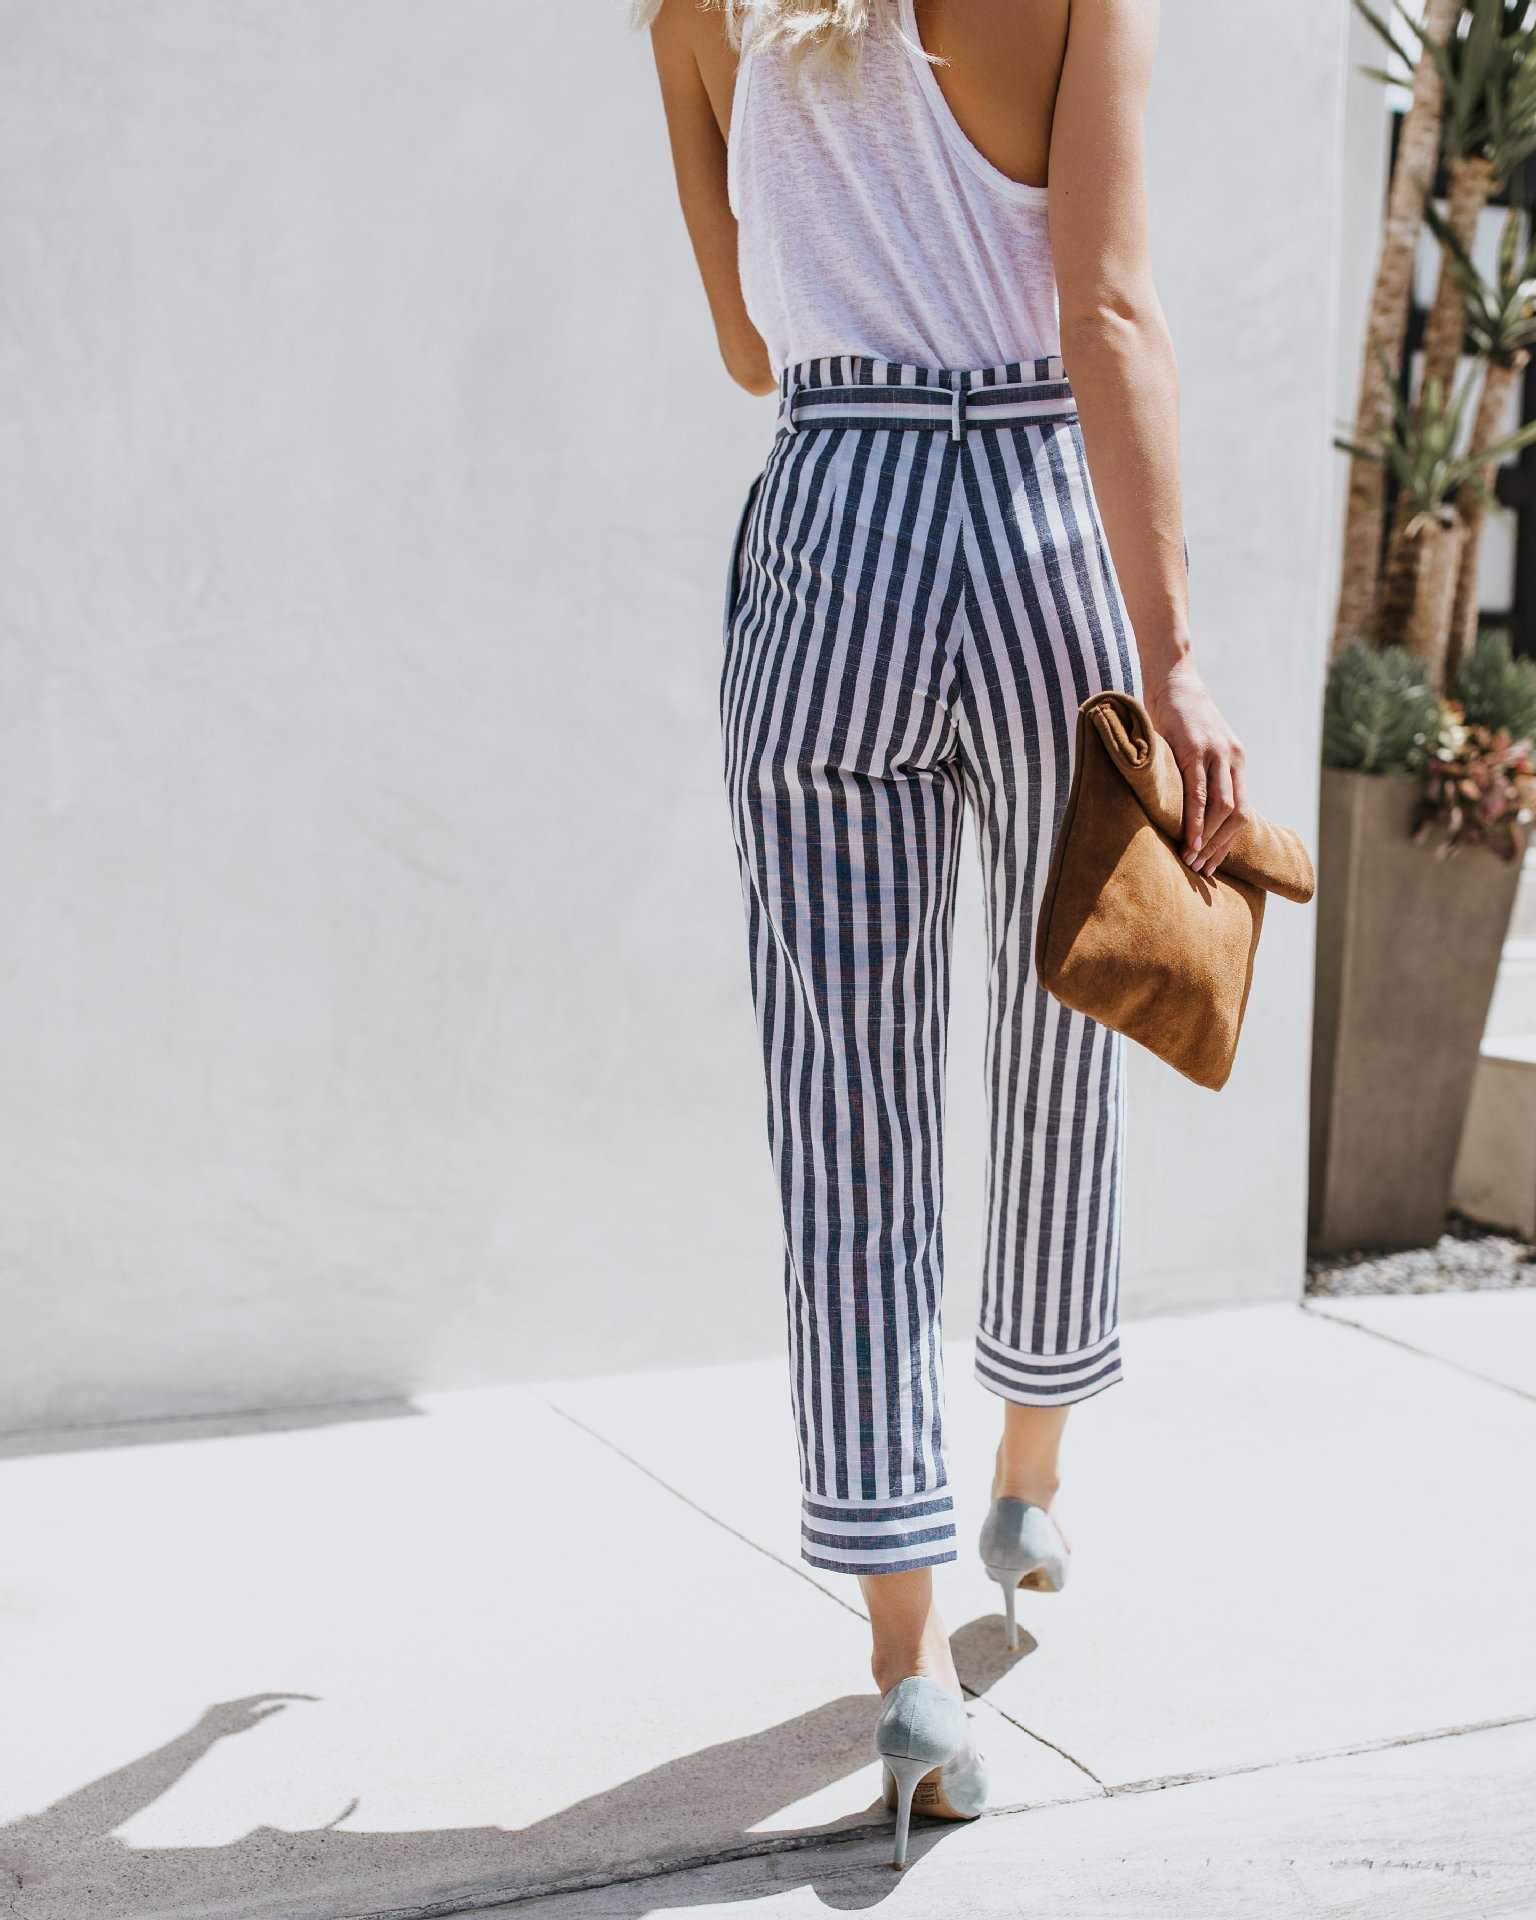 Striped Dress Shirt with Striped Cigarette Trousers